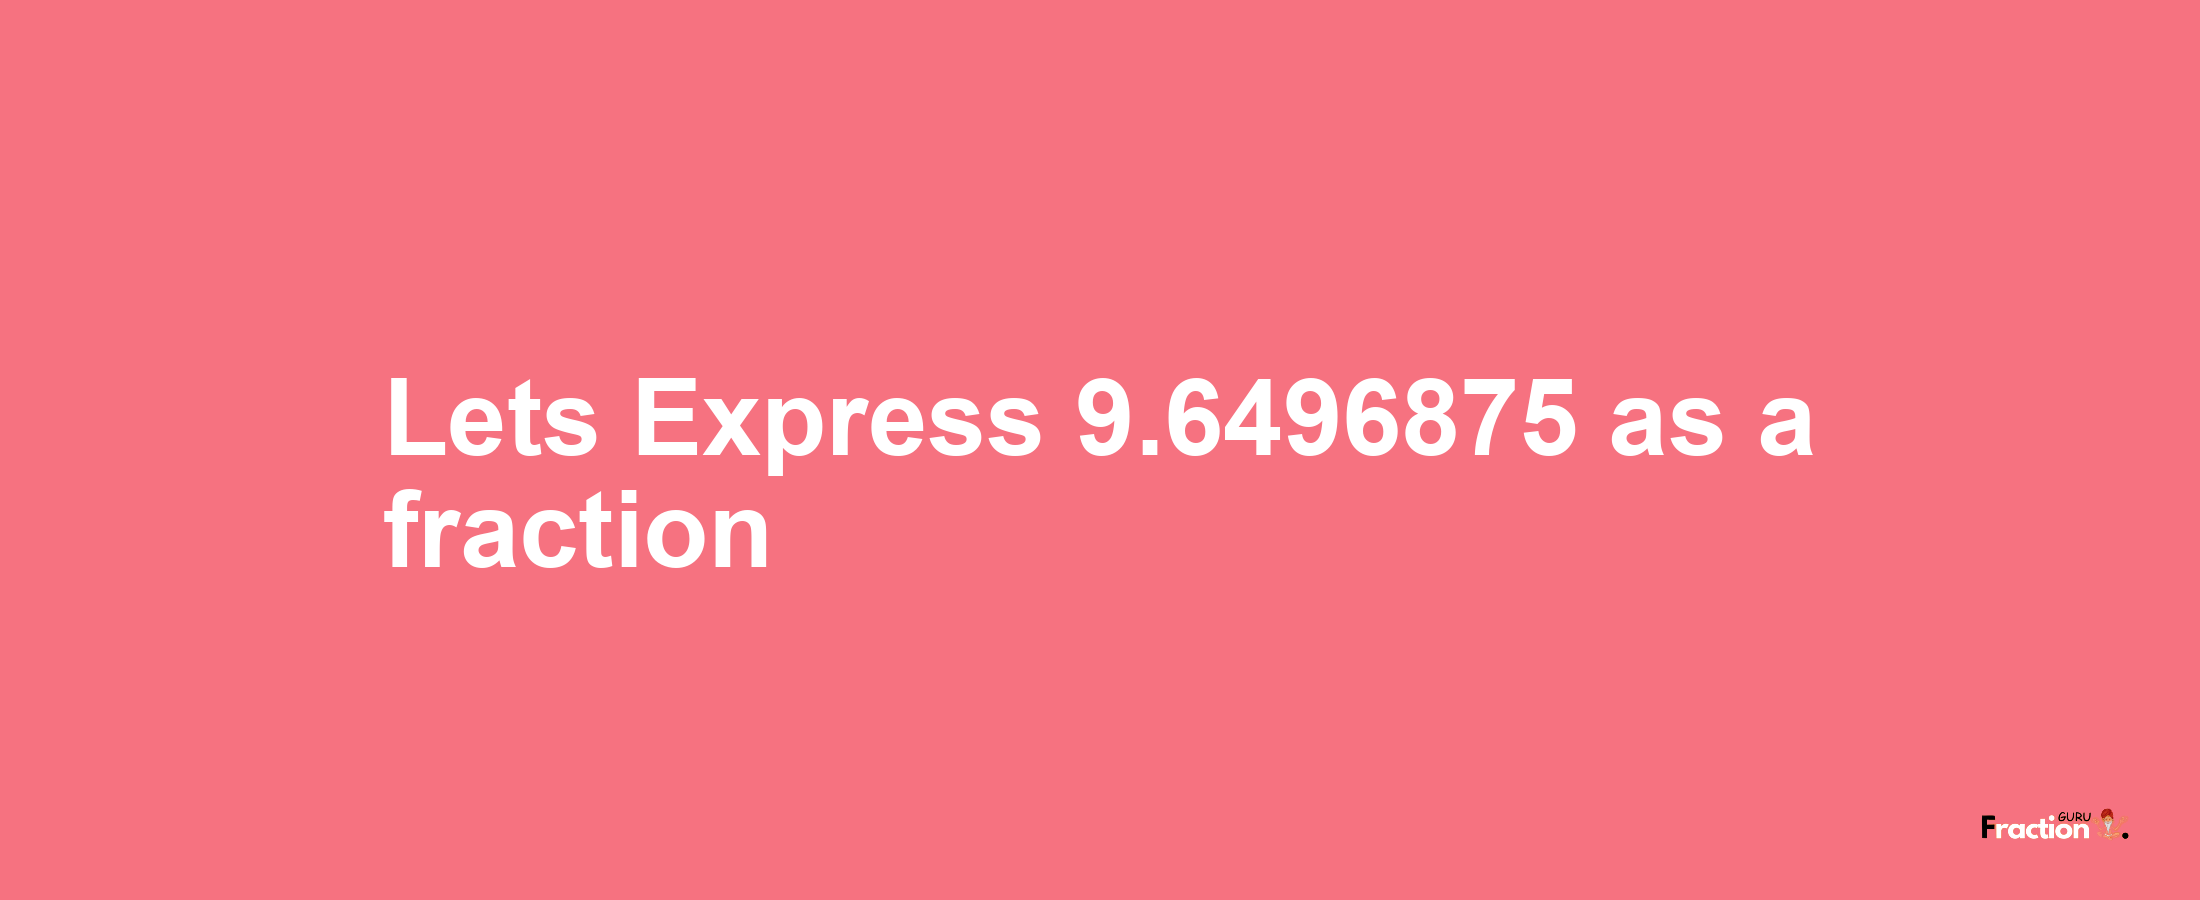 Lets Express 9.6496875 as afraction